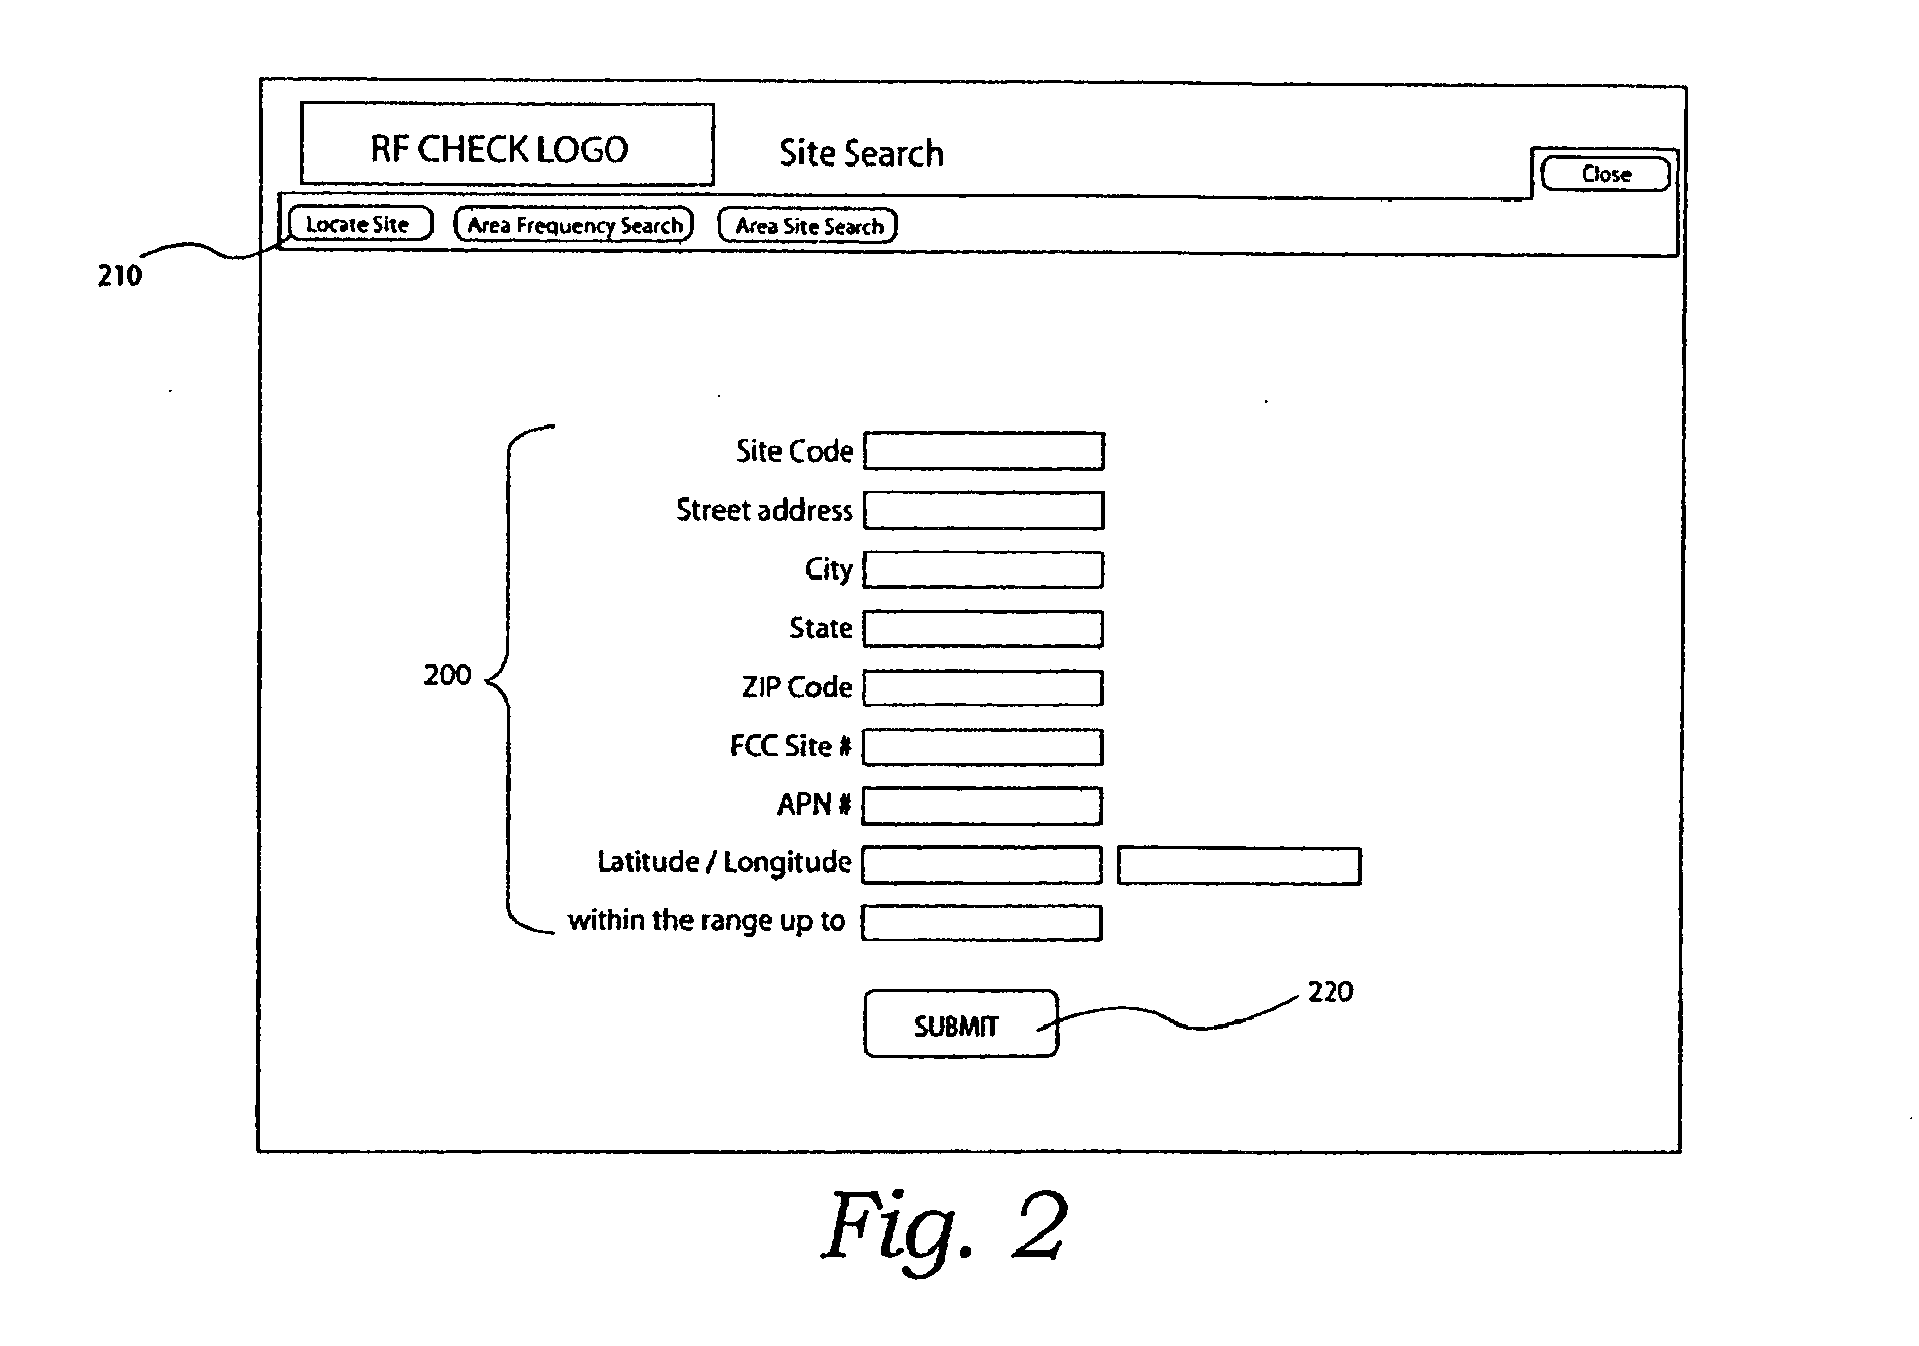 Interactive Graphical User Interface for an Internet Site Providing Data Related to Radio Frequency Emitters